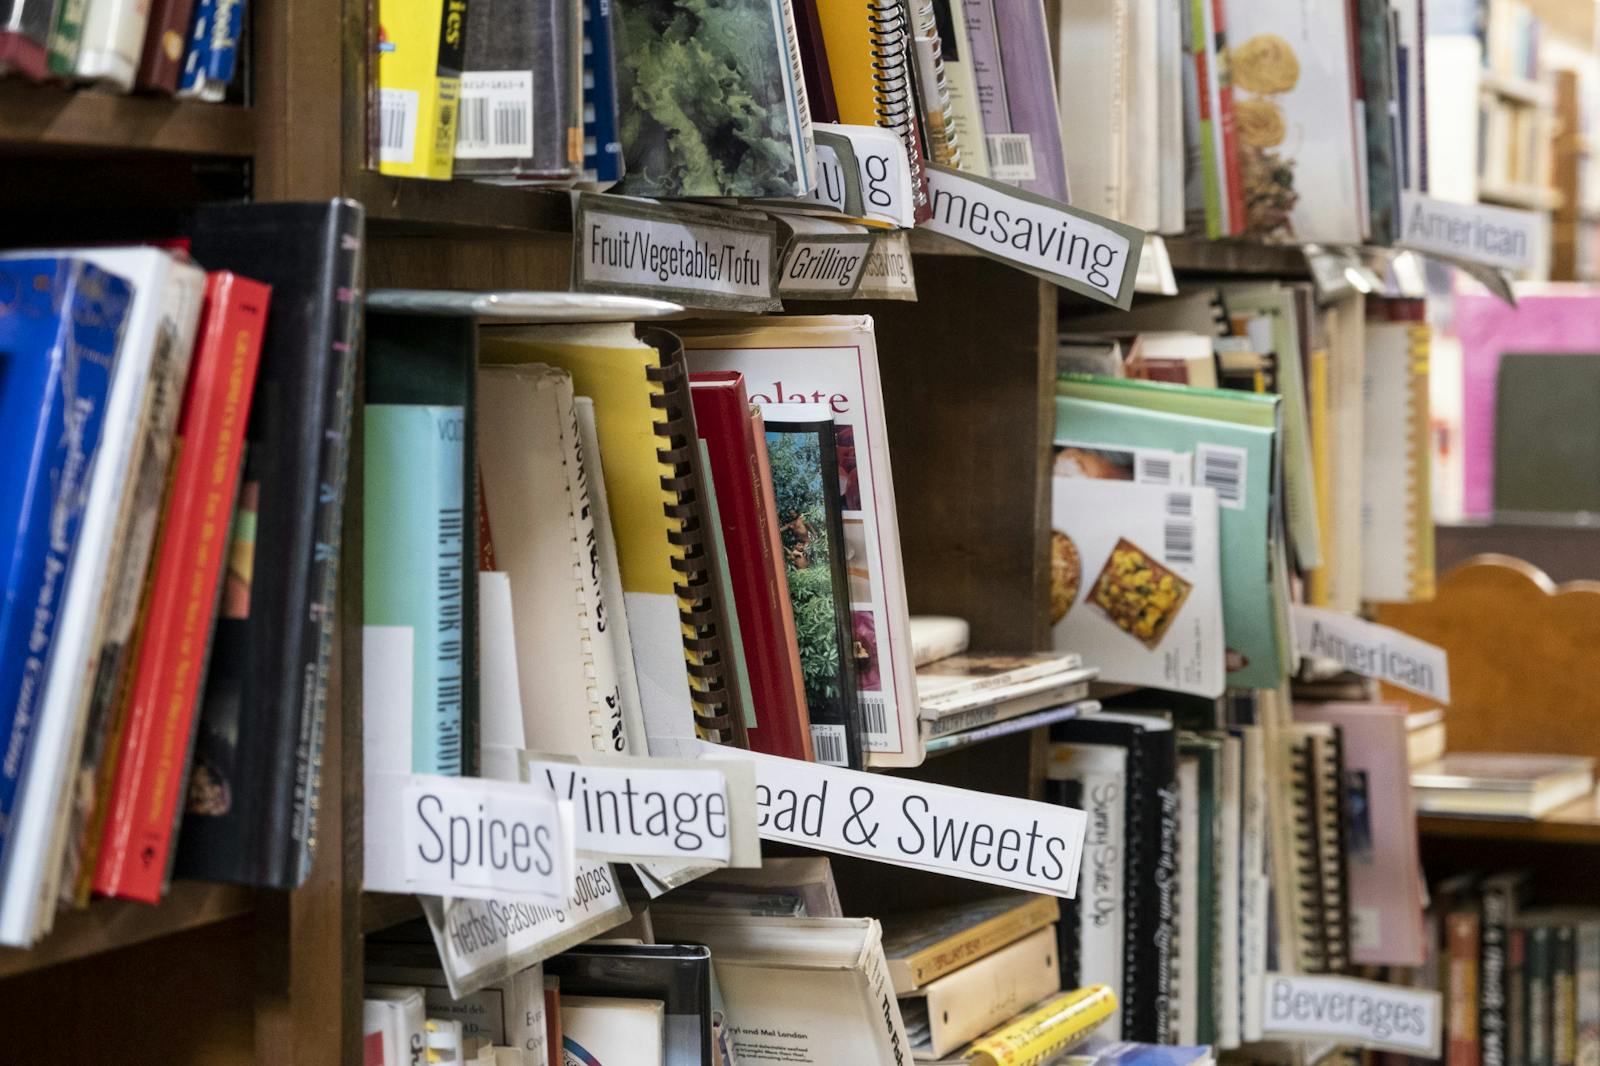 Your guide to bookstores in the Greater Lansing area - The State News